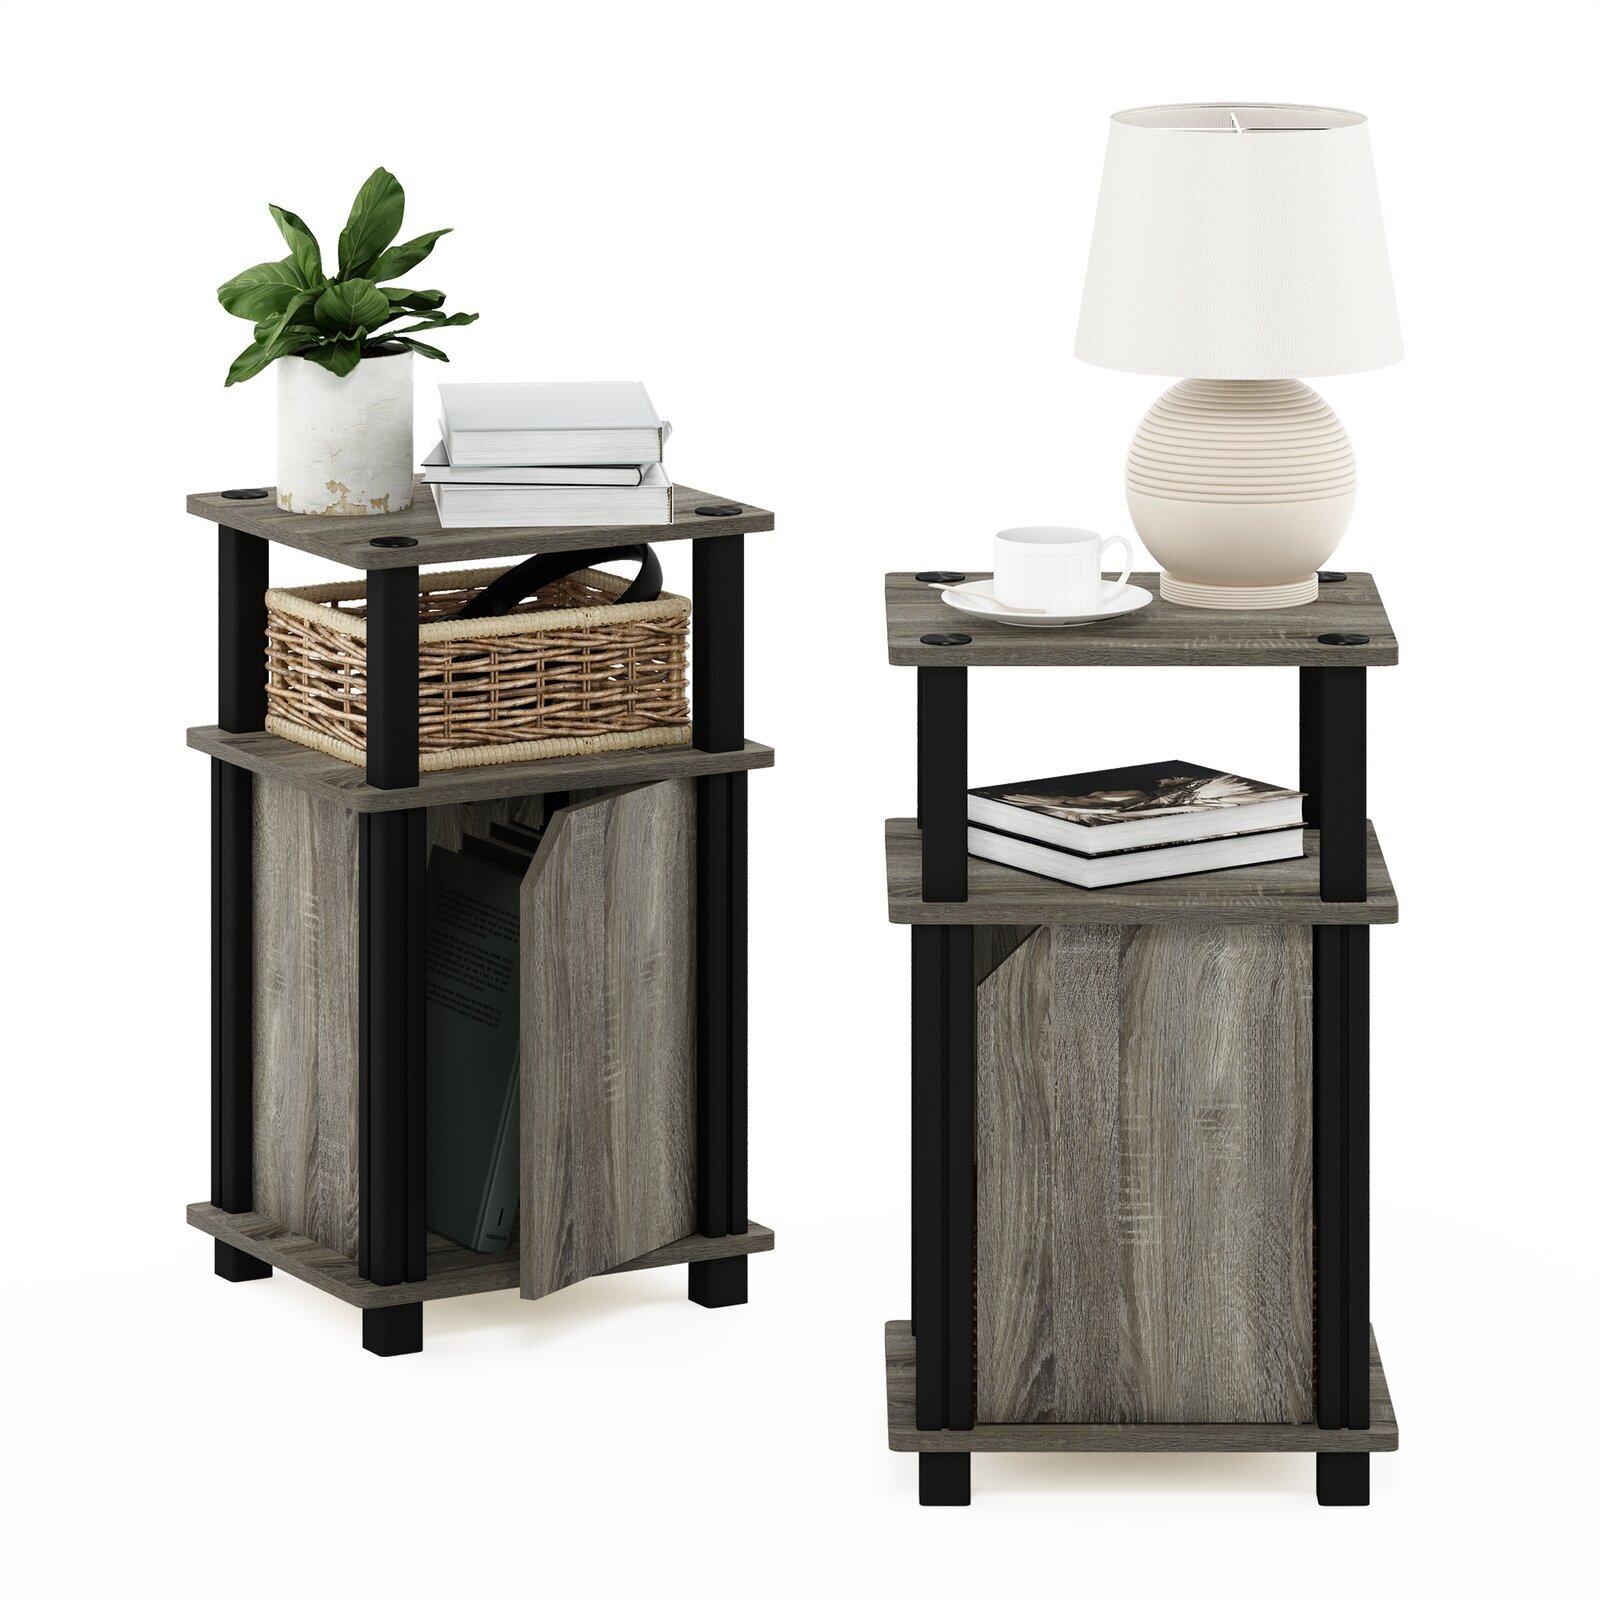 Pair of 8 inch wide tables for your living room